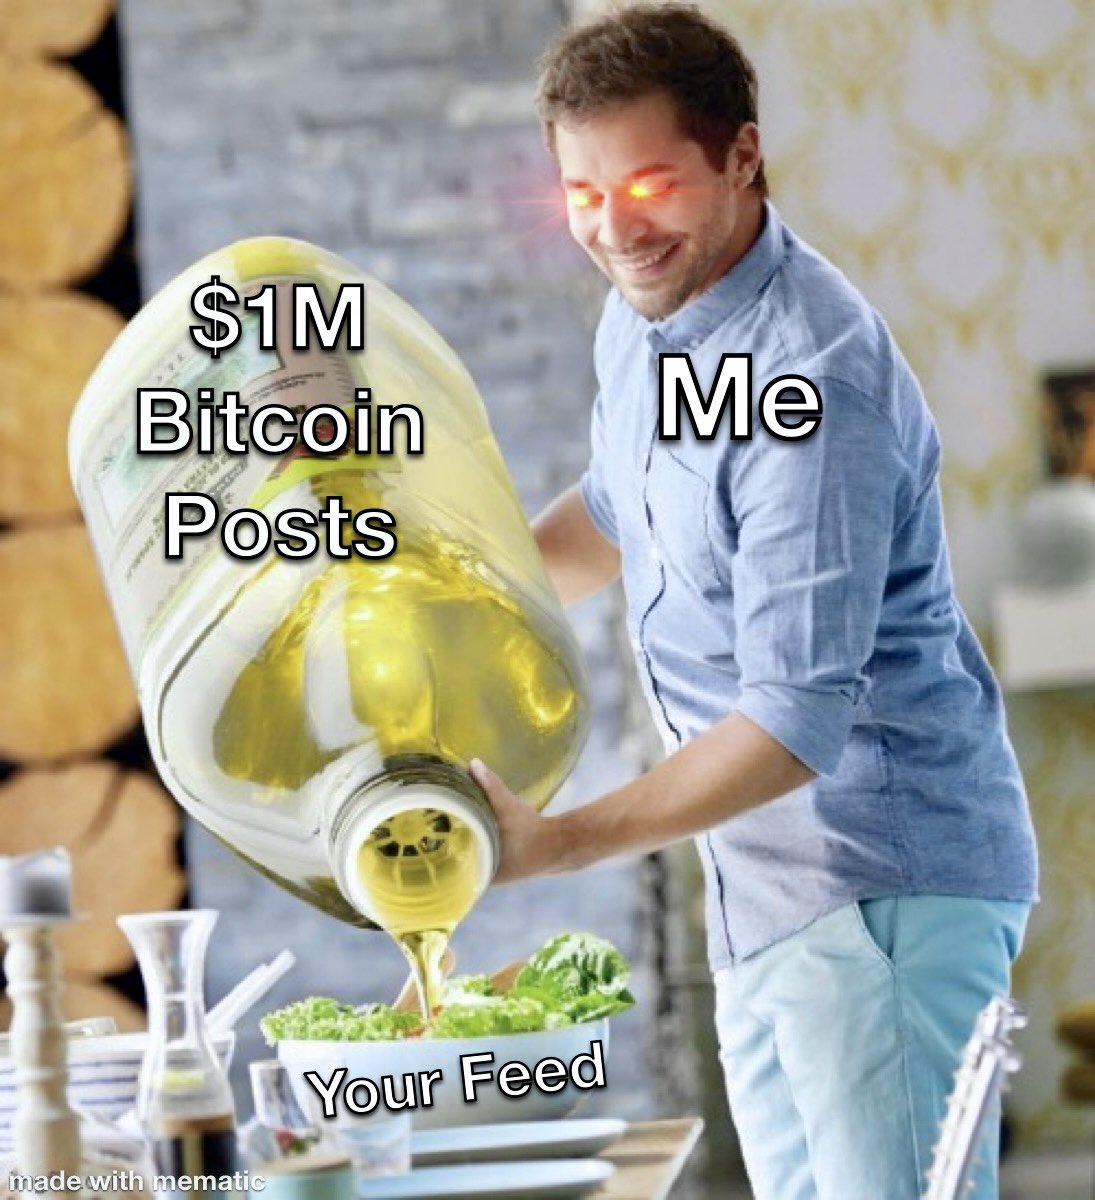 $1M
Bitcoin
Posts
made with mematic
Your Feed
Me